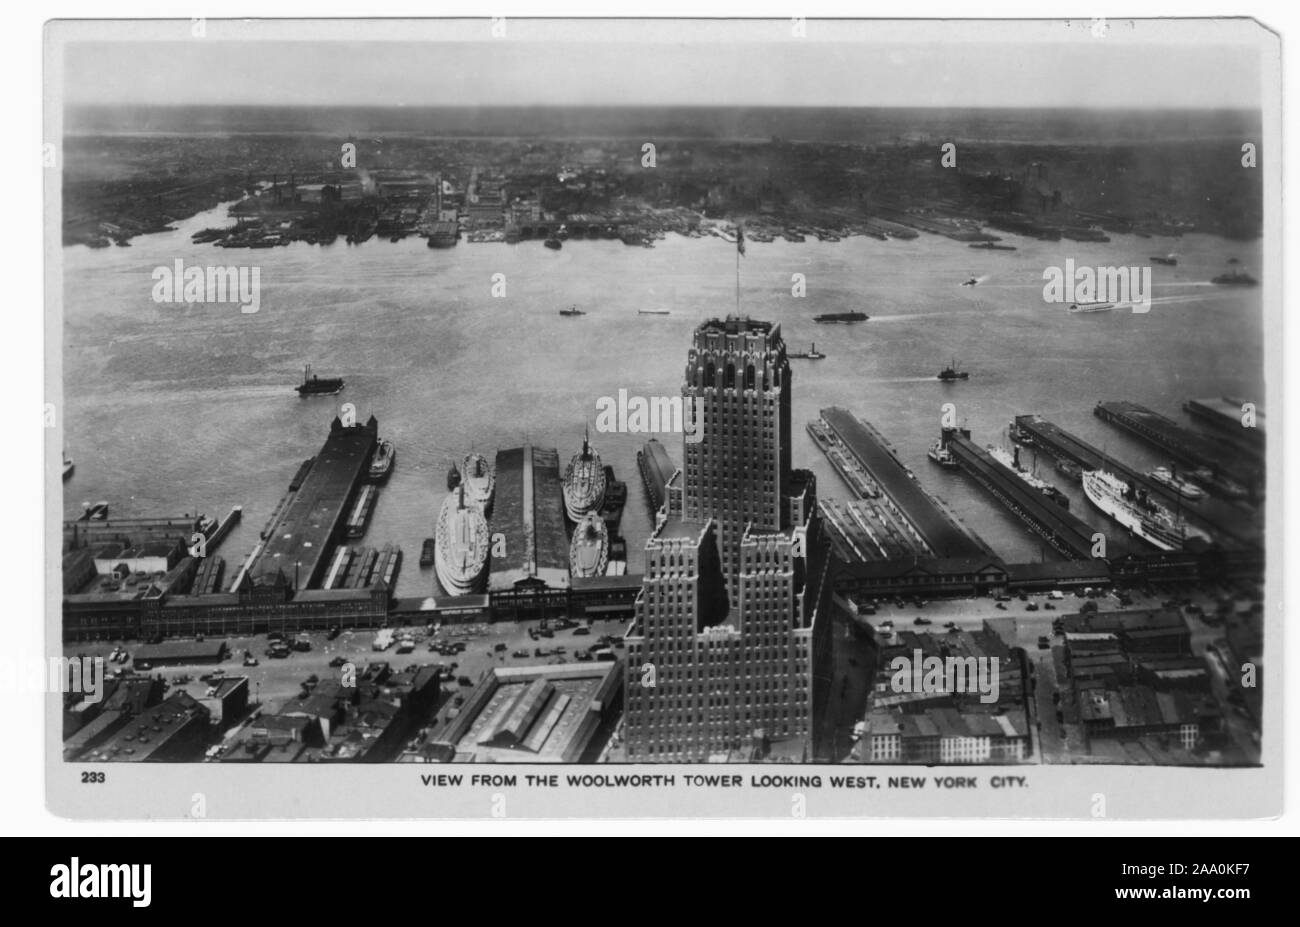 Engraved postcard of an aerial view of the Hudson River and piers from the Woolworth Building, New York City, published by L. Jonas and Company Inc, 1935. From the New York Public Library. () Stock Photo